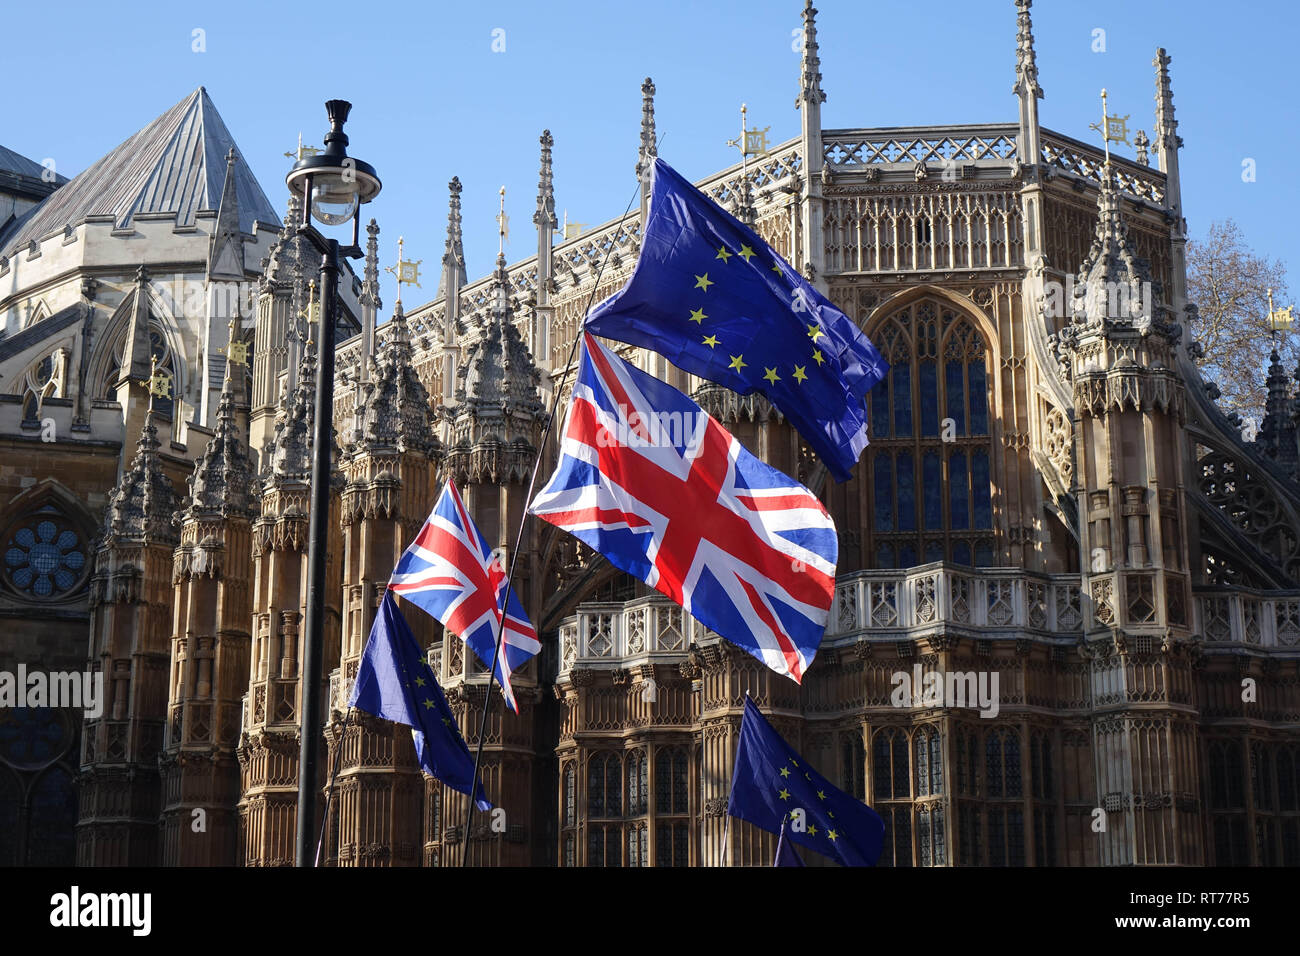 London, UK. 27th Feb, 2019. Anti-Brexit Activist demonstrate opposite Palace Of Westminster in London. Credit: Thomas Krych/Alamy Live News Stock Photo